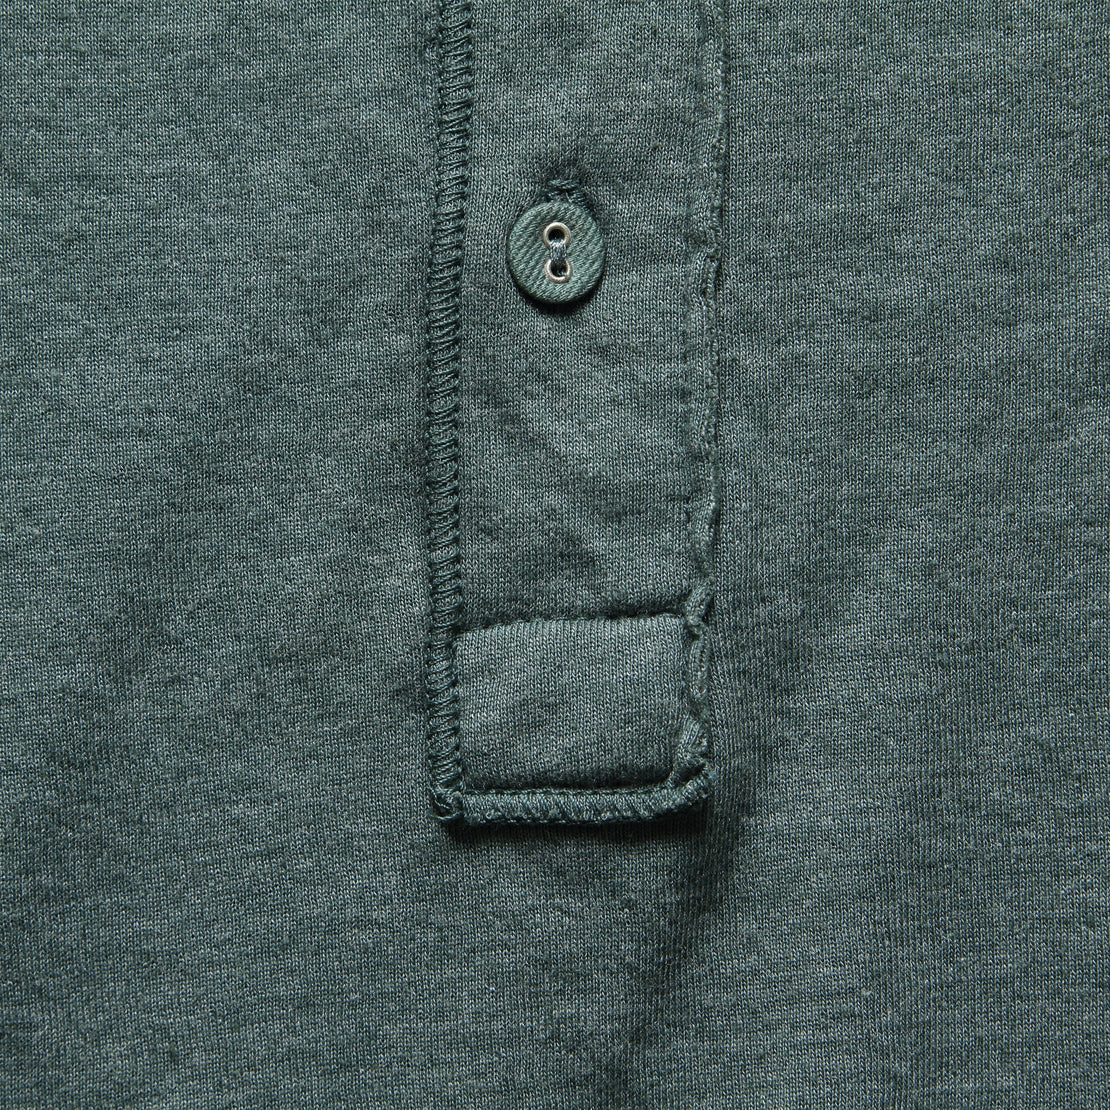 Pointelle Henley - Olive Drab - Save Khaki - STAG Provisions - Tops - L/S Knit